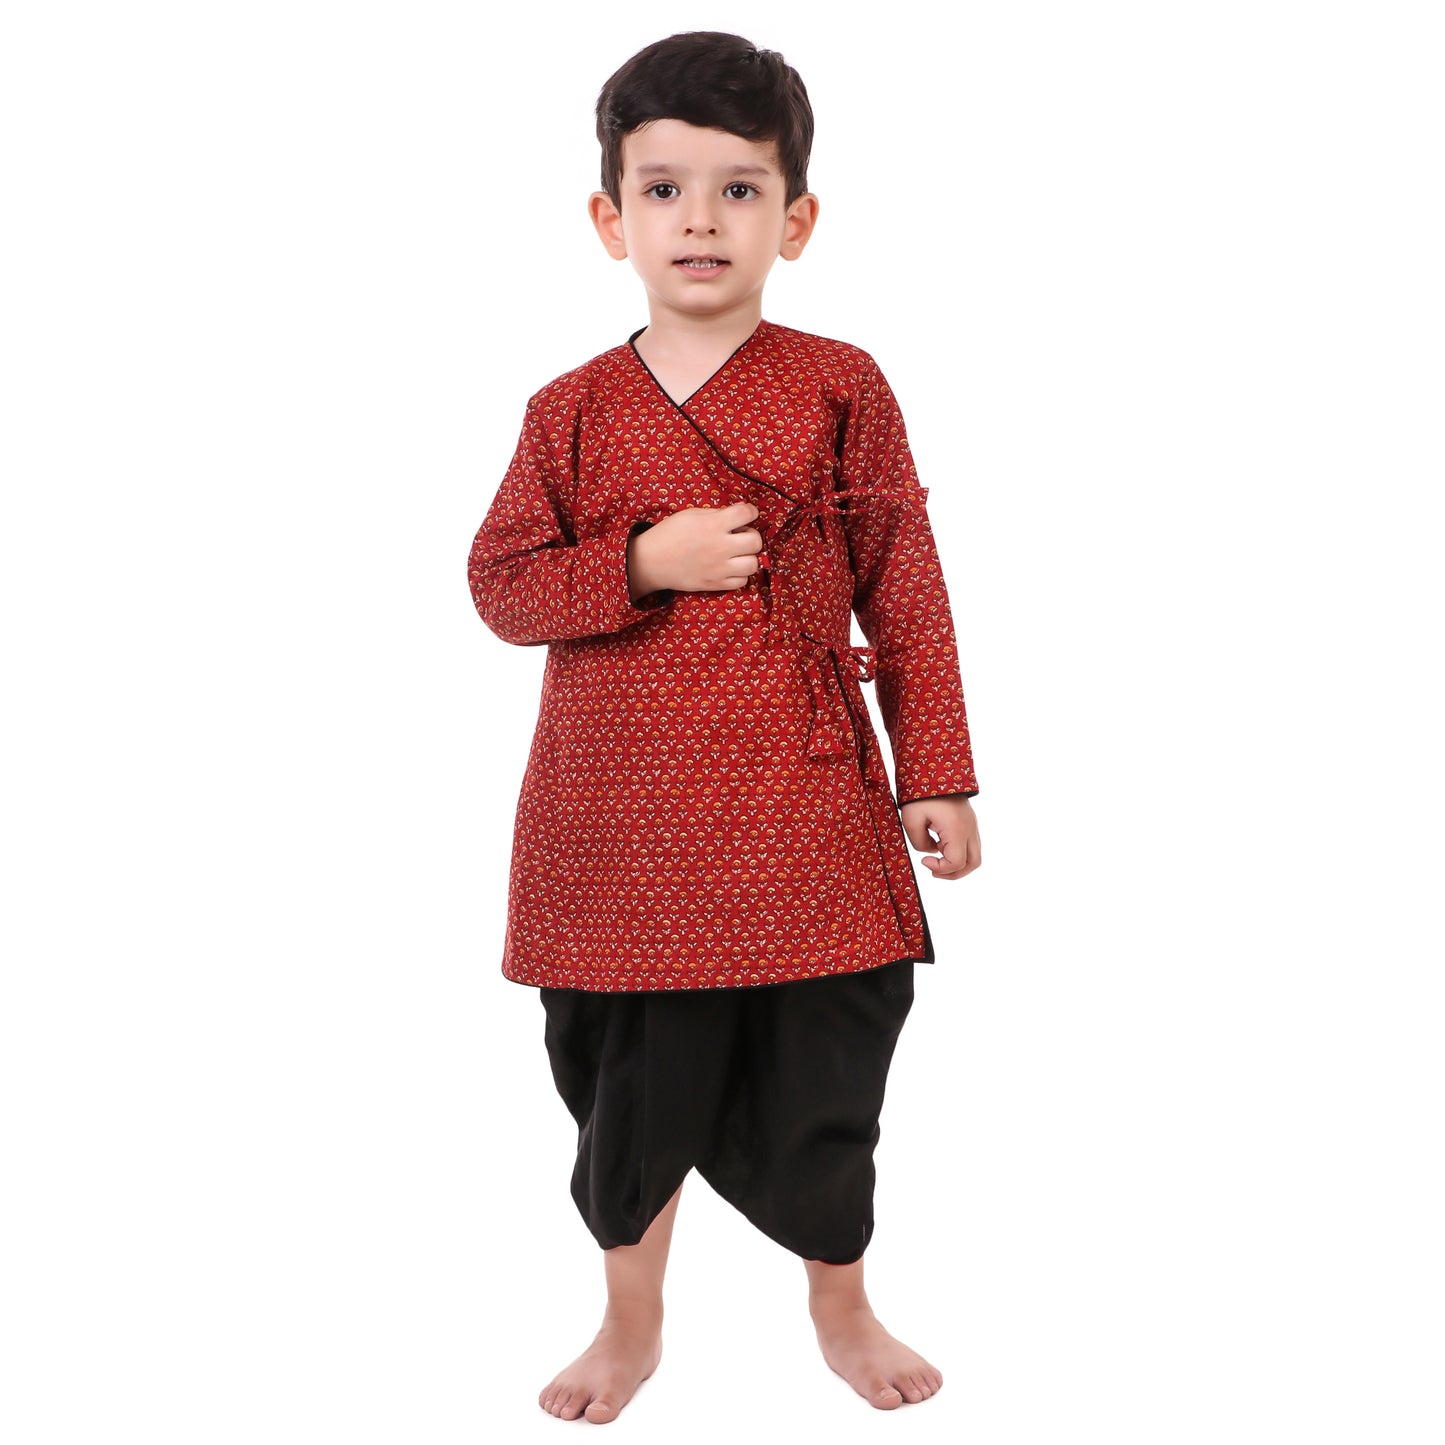 Maroon Dhoti Kurta for Boys, Ages 3 Months-16 Years, Cotton, Angrakha Style, Block Print